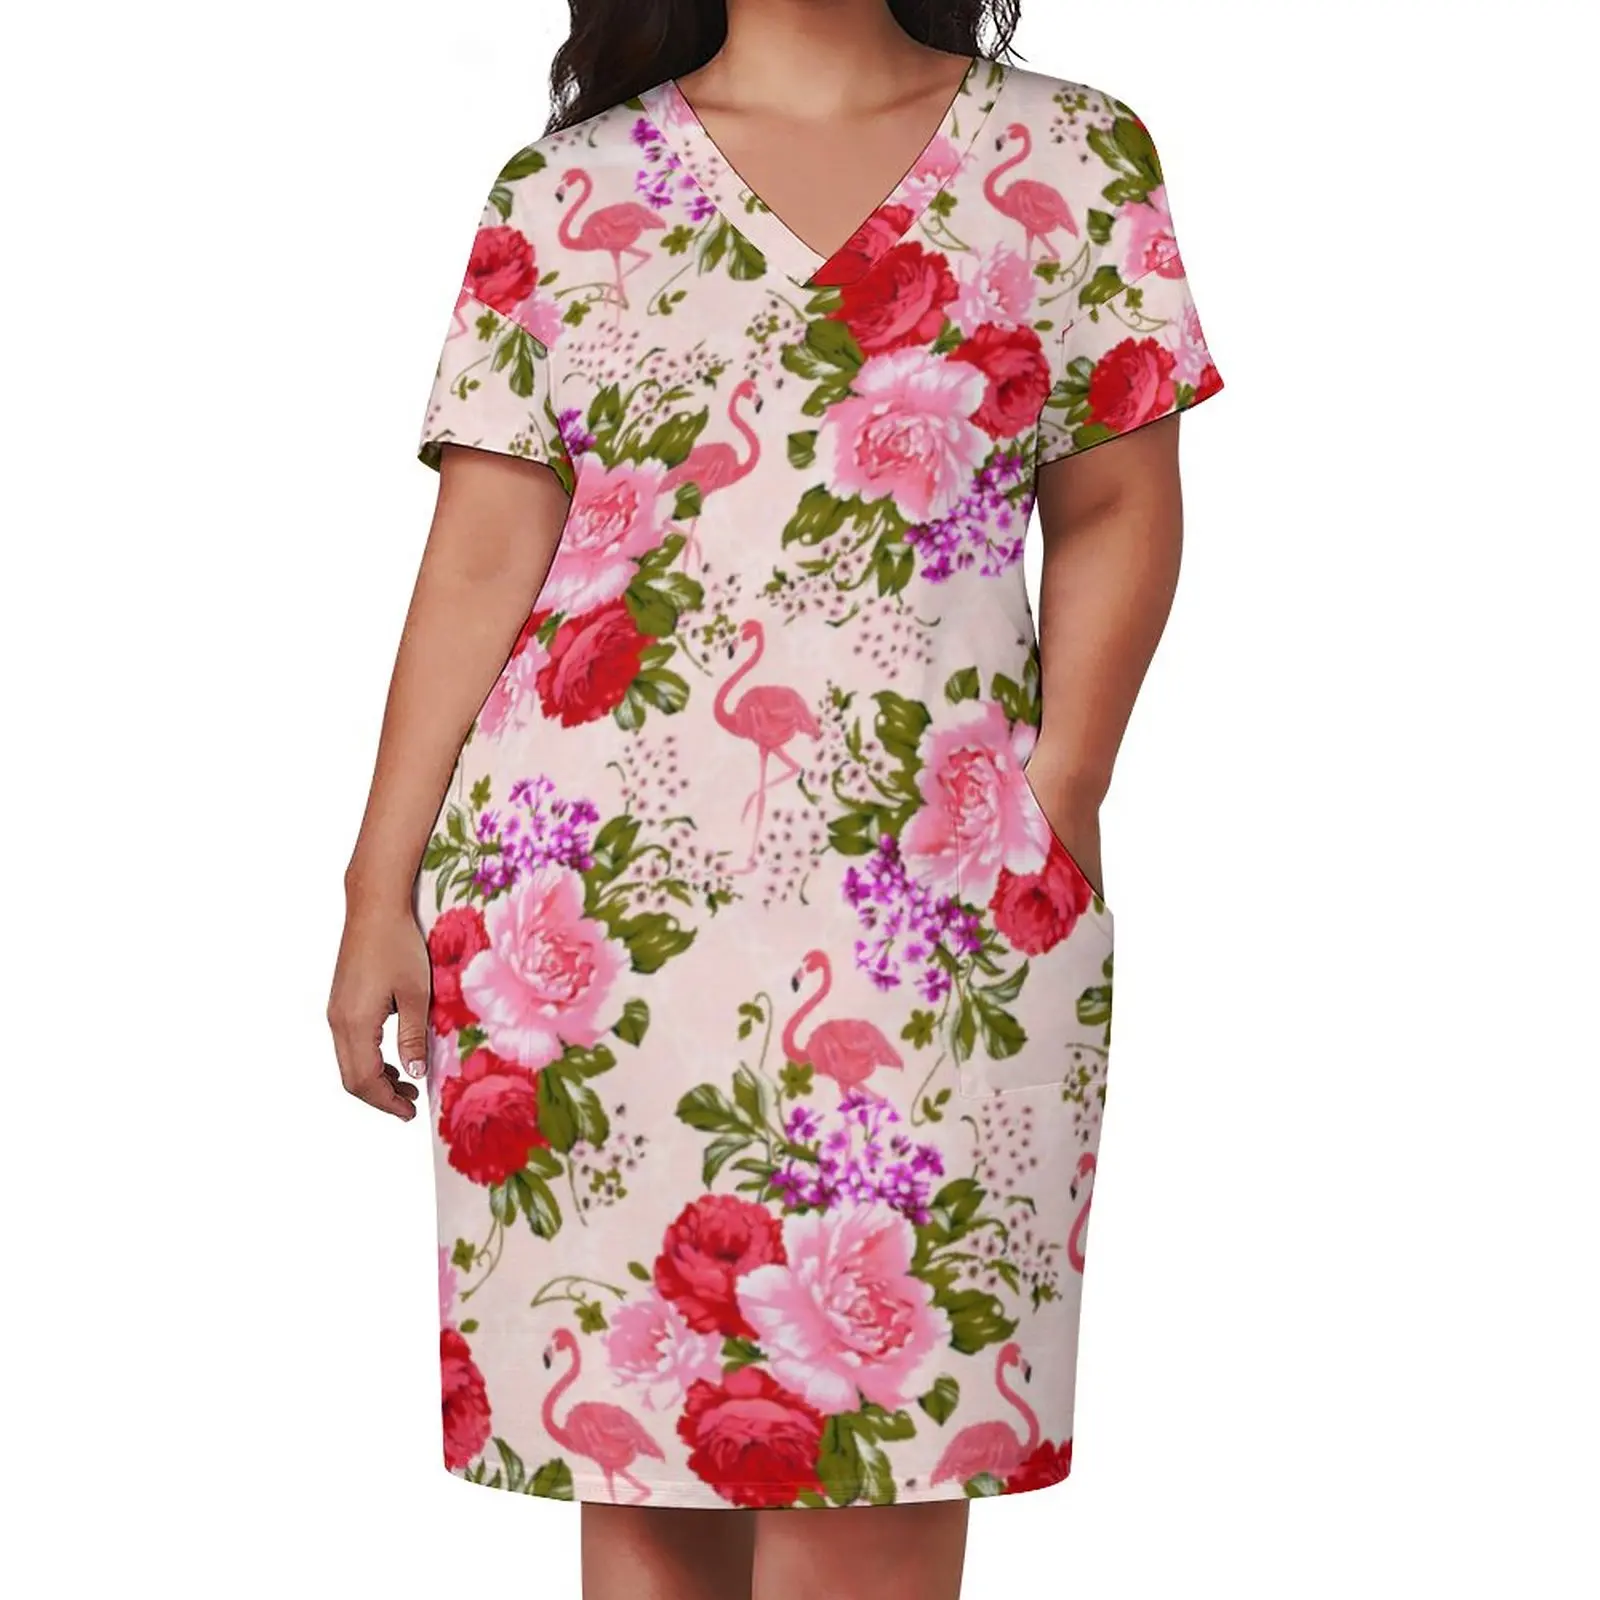 Tropical Baroque Floral Dress V Neck Vintage Pink Roses Aesthetic Dresses Retro Casual Dress Womens Graphic Plus Size Clothing